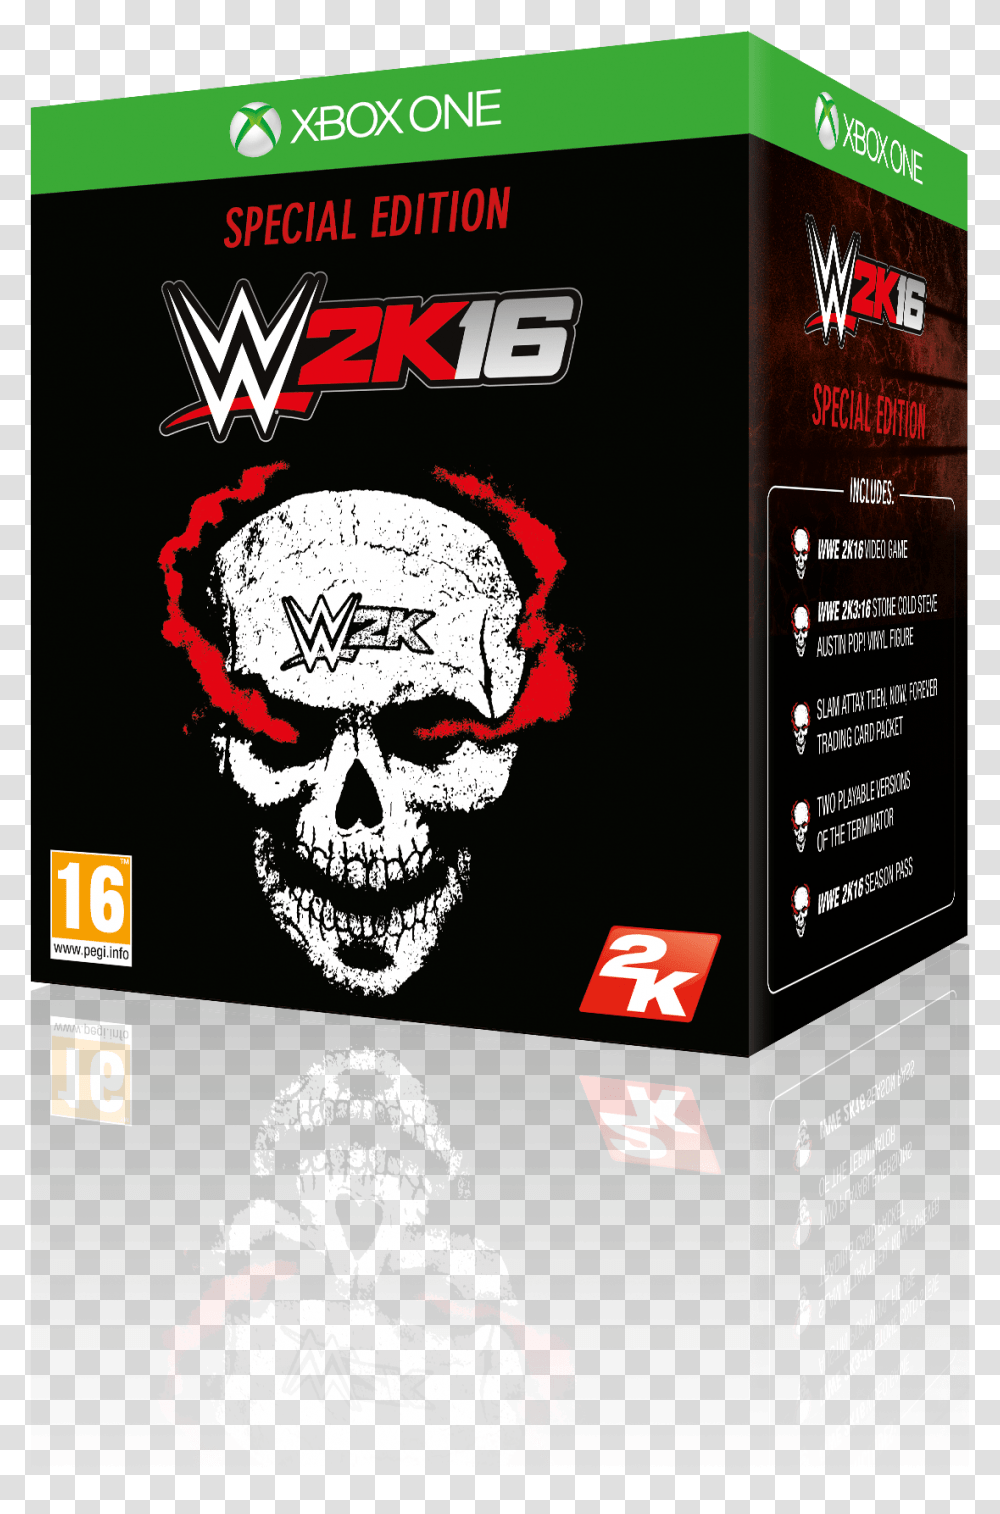 Wwe 2k16 Xb1 Game Se Box 3d Eng Wwe 2k16 Collector's Edition, Advertisement, Poster, Flyer Transparent Png